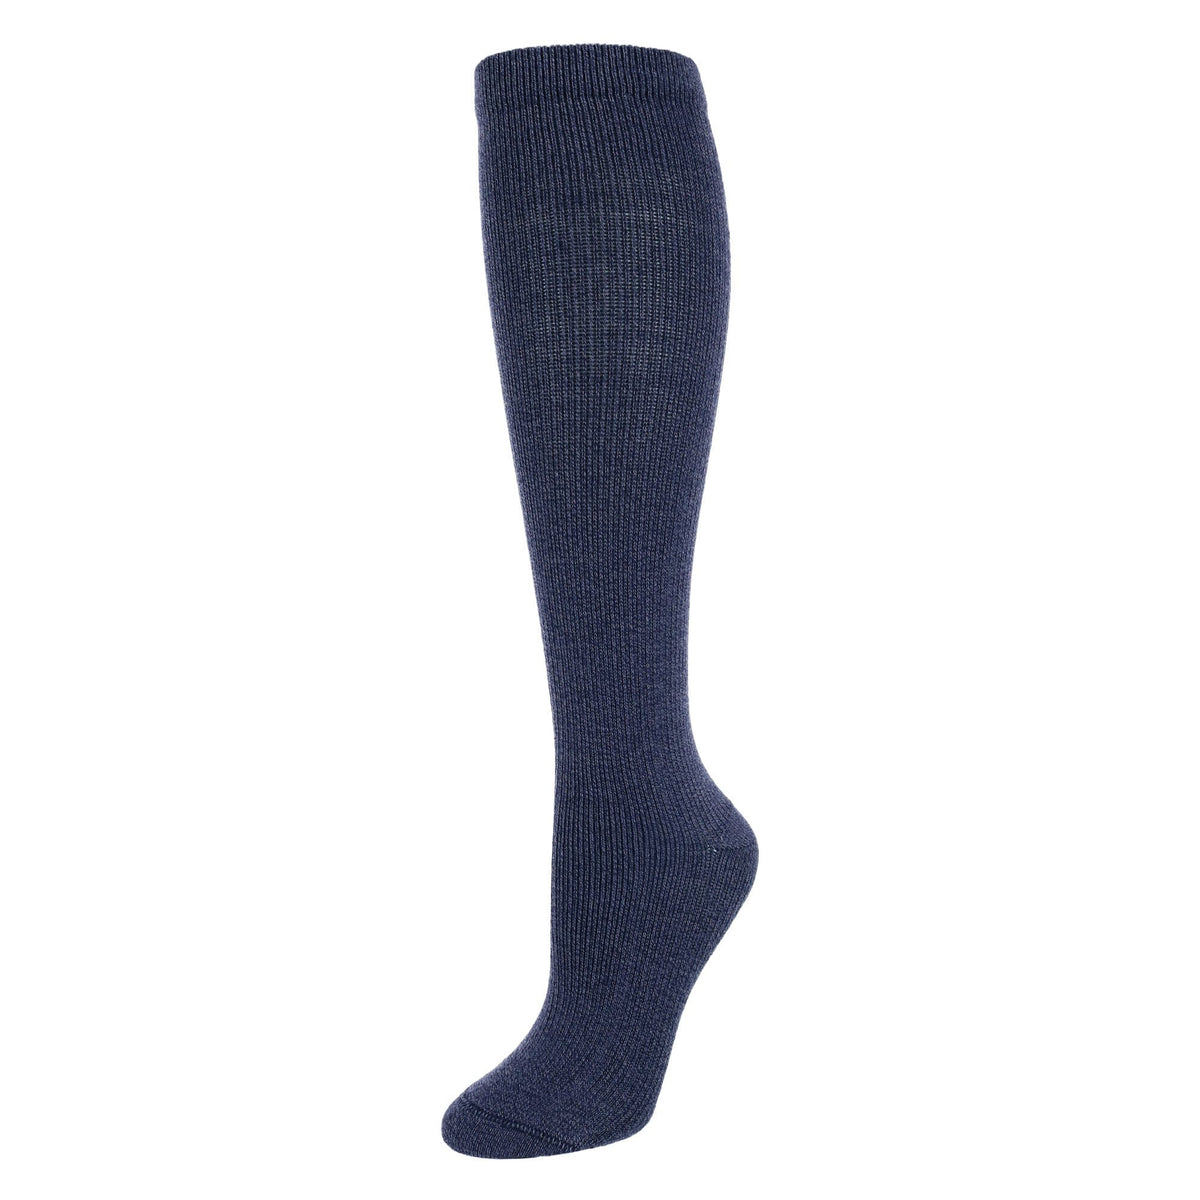 Women's Marled Knee High Compression Socks by Dr Scholls | Knee and ...